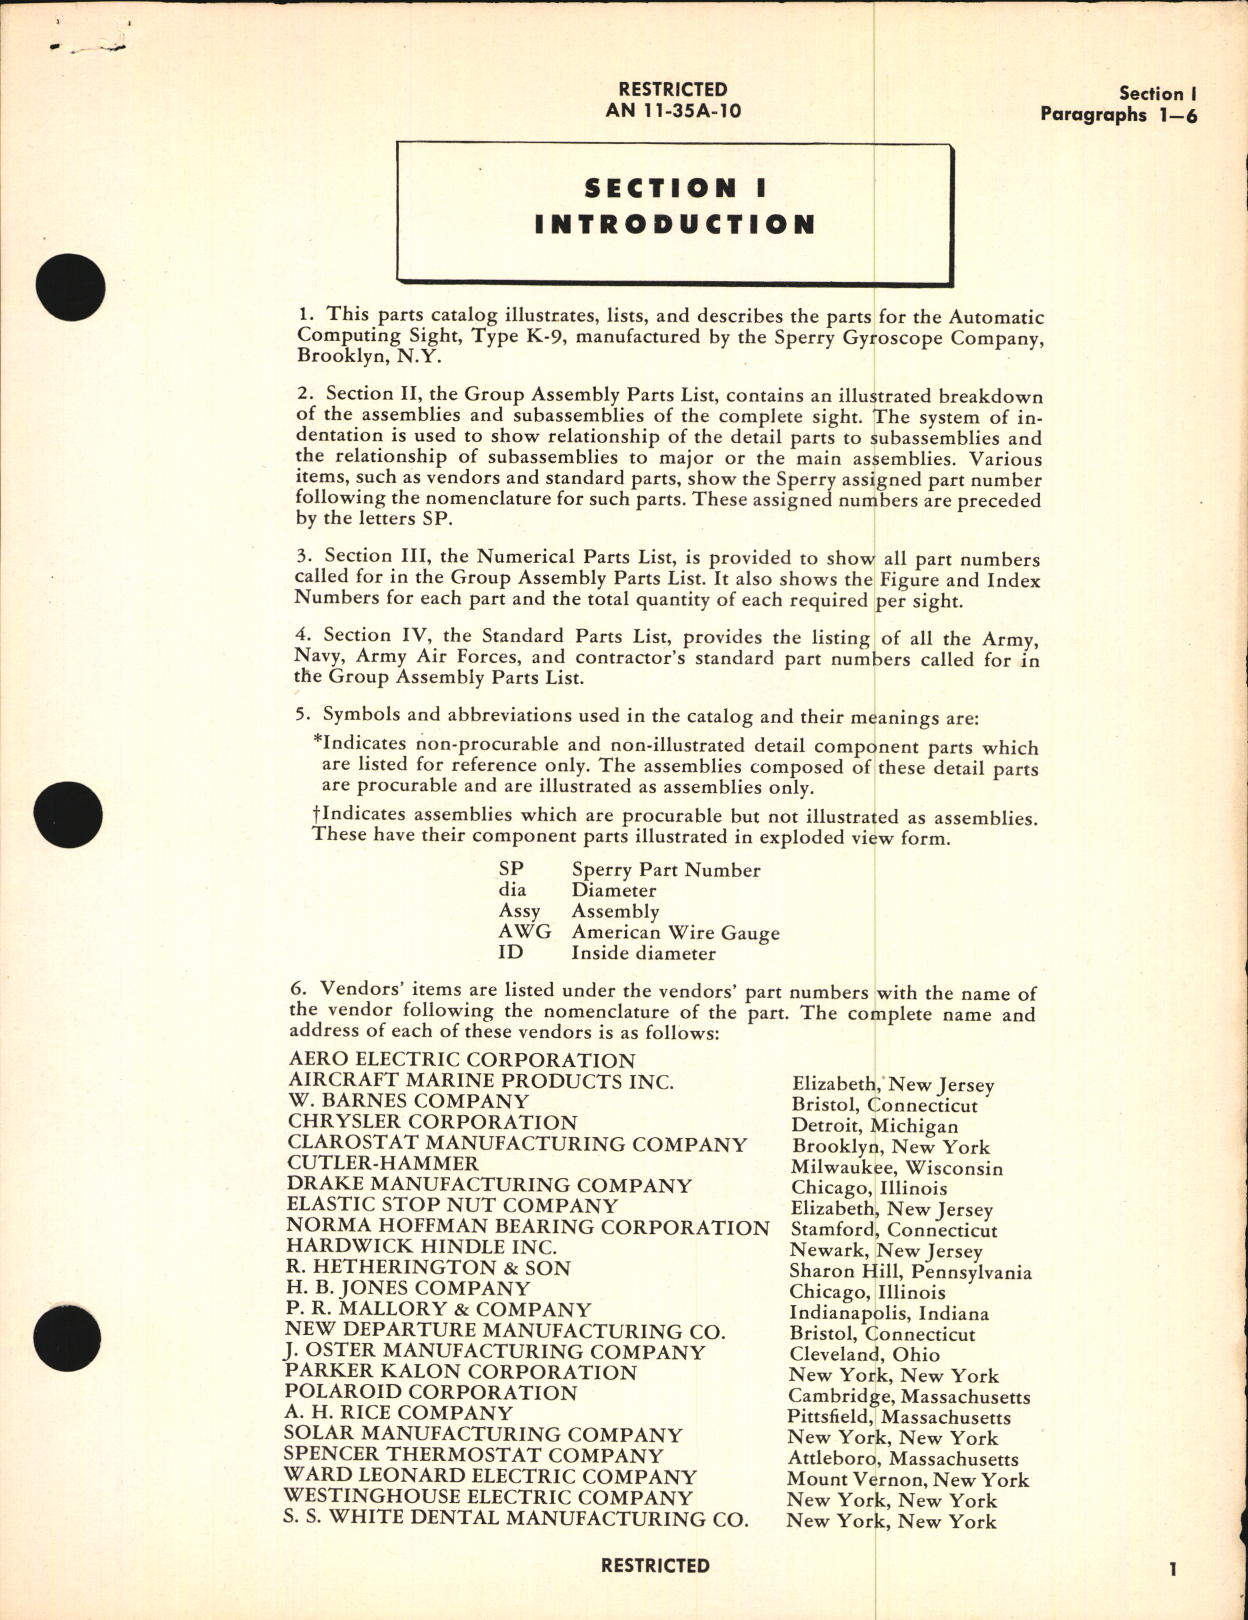 Sample page 5 from AirCorps Library document: Parts Catalog for Type K-9 Automatic Computing Sight